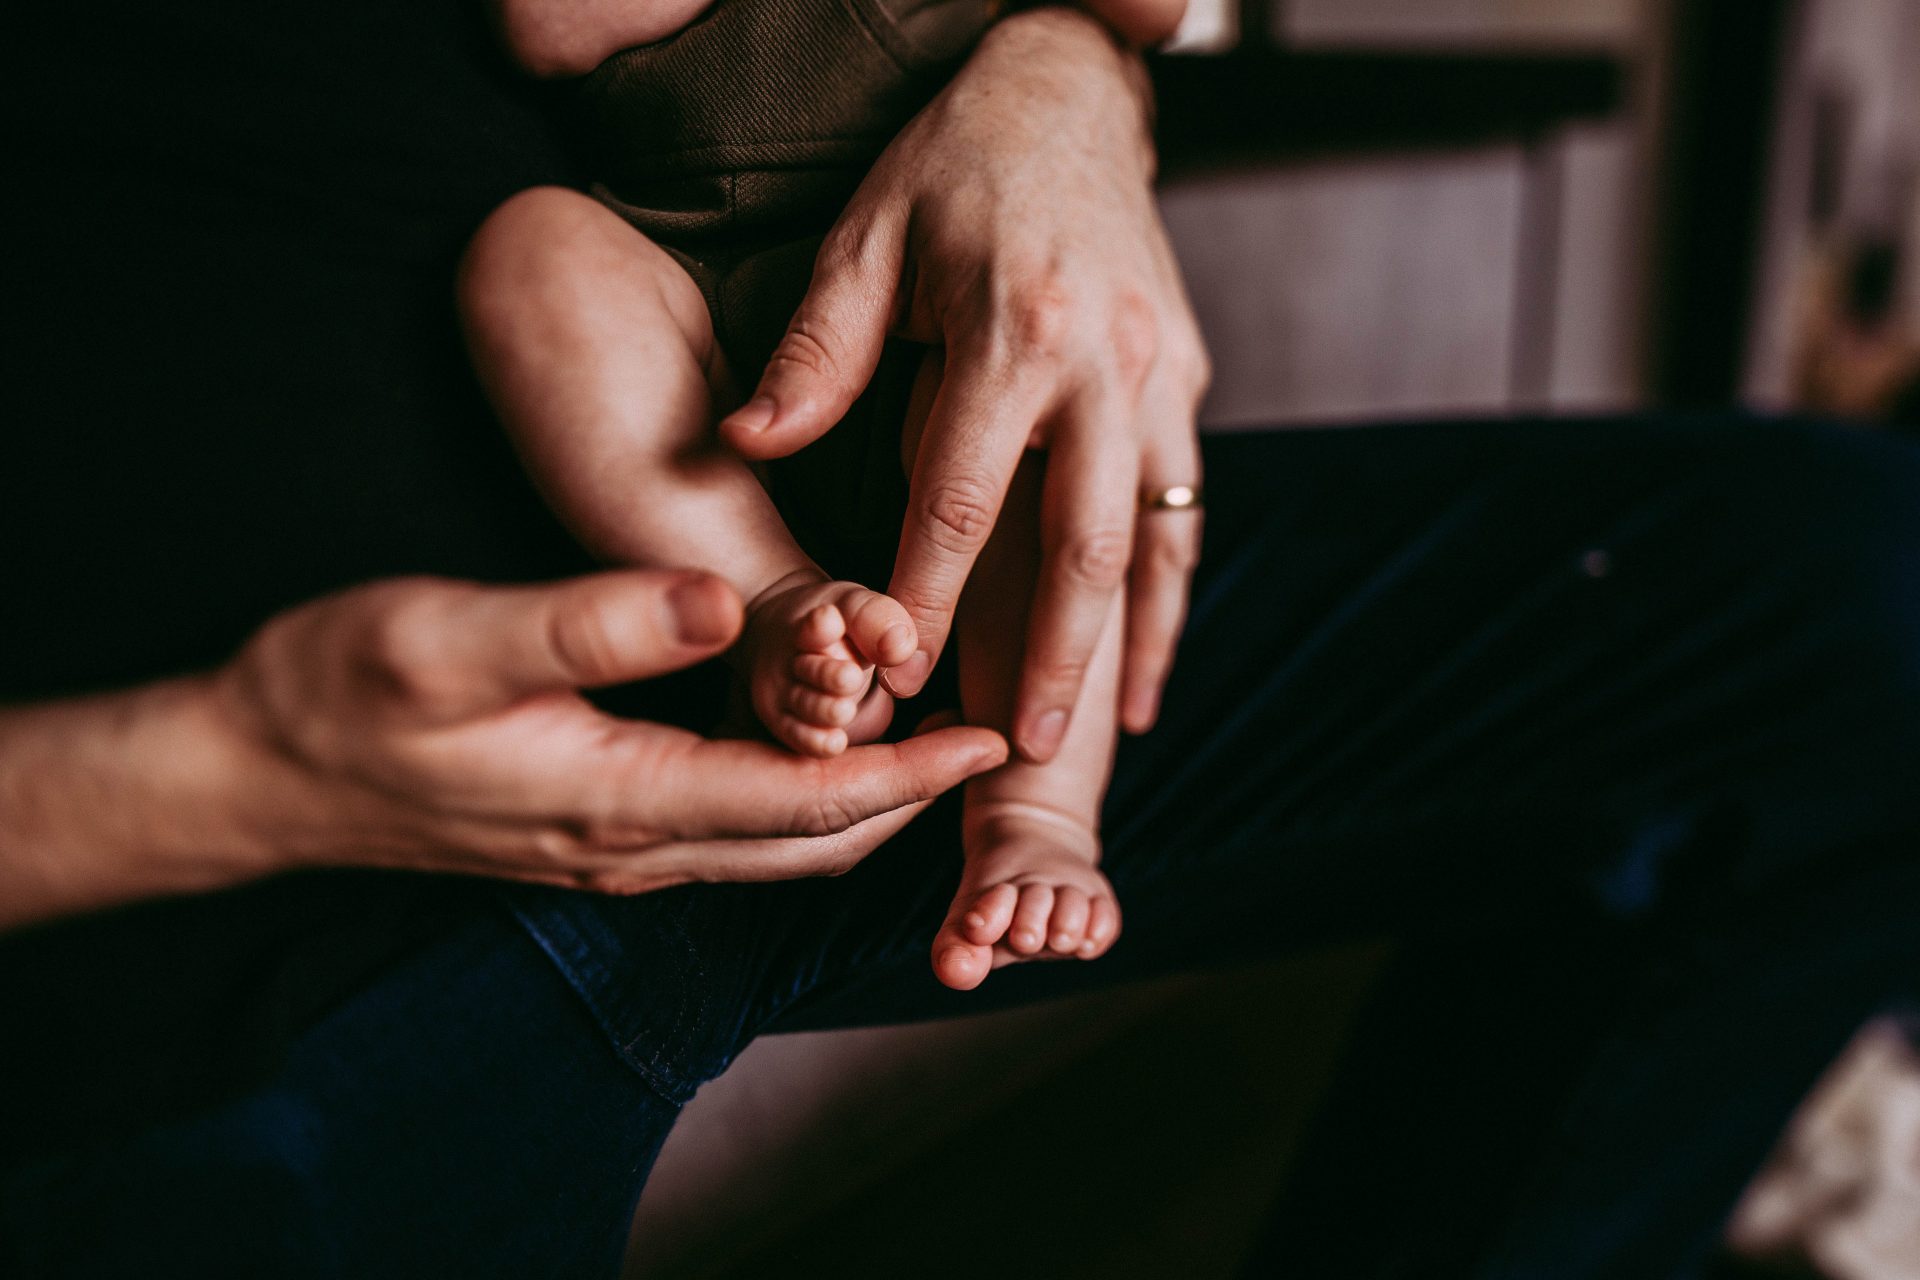 The parents of two infants have been left searching for answers after their babies died under mysterious circumstances at an unregistered daycare facility in East London.  Photo by Helena Lopes from Pexels.